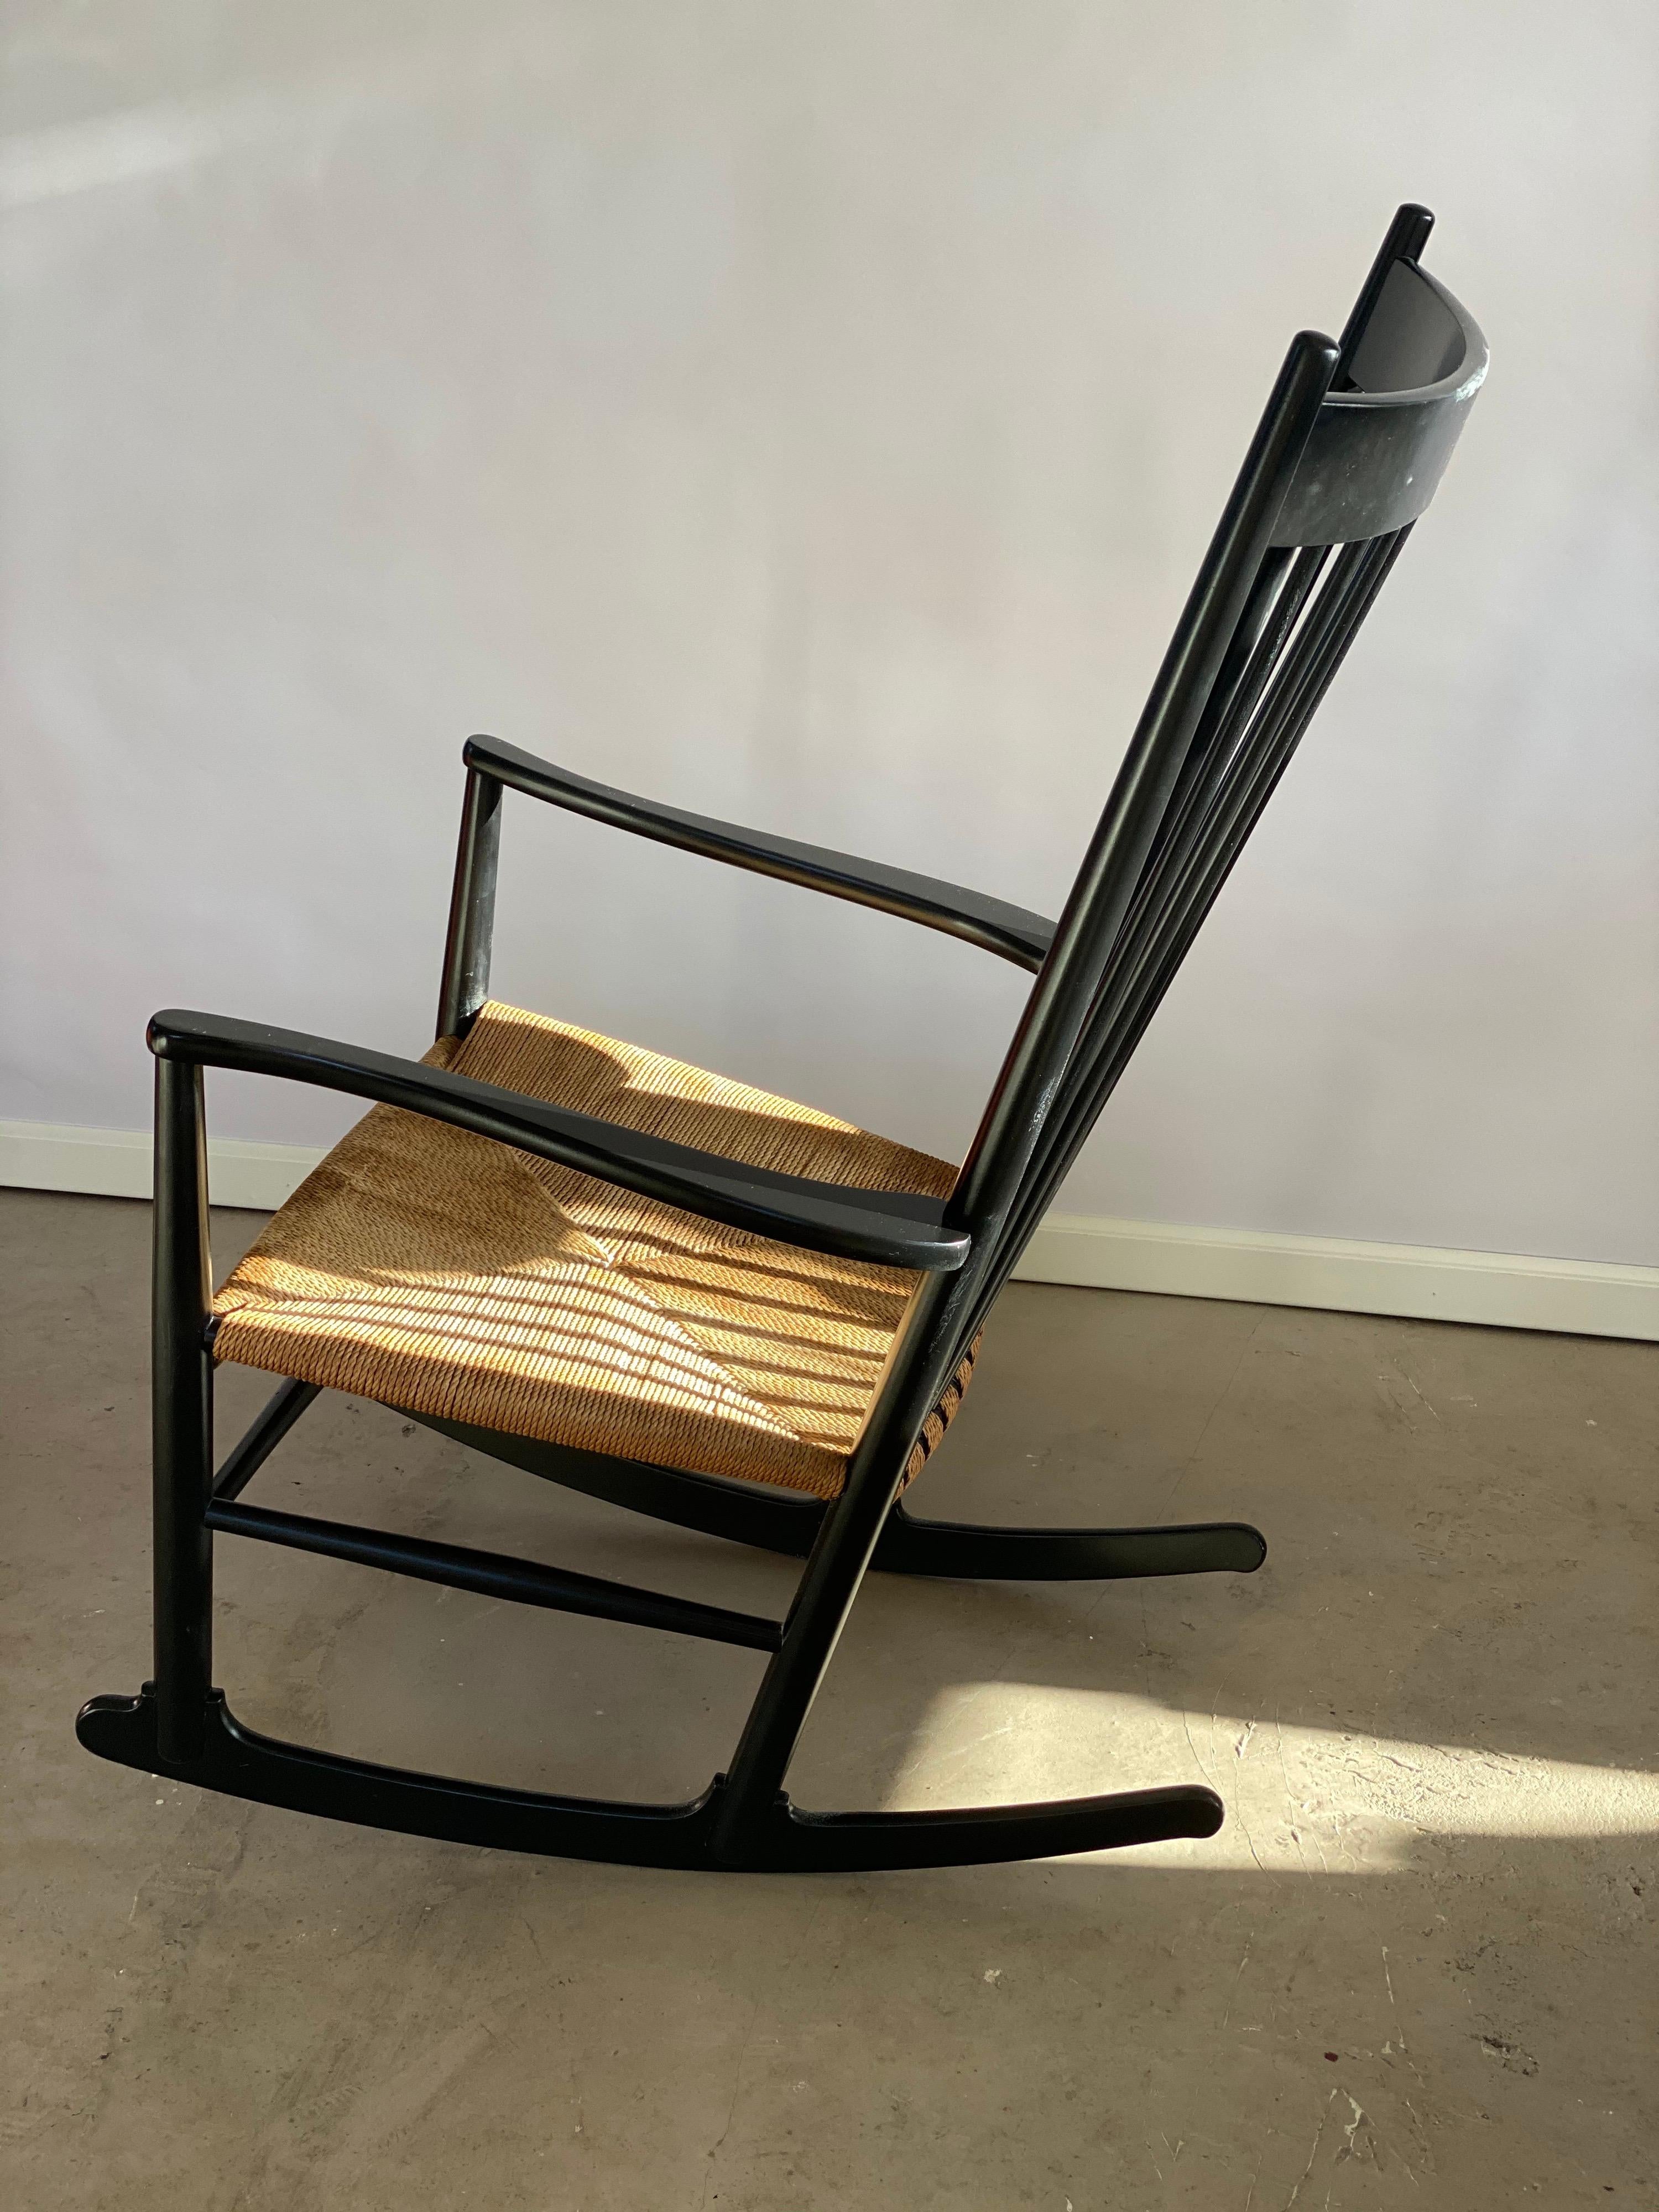 Hans Wegner rocking chair model J.16 with the characteristic high spindle back and the shapely curves lines. This originally black version has been completely overhauled, sanded and professionally re-painted in the original matte black finish. The